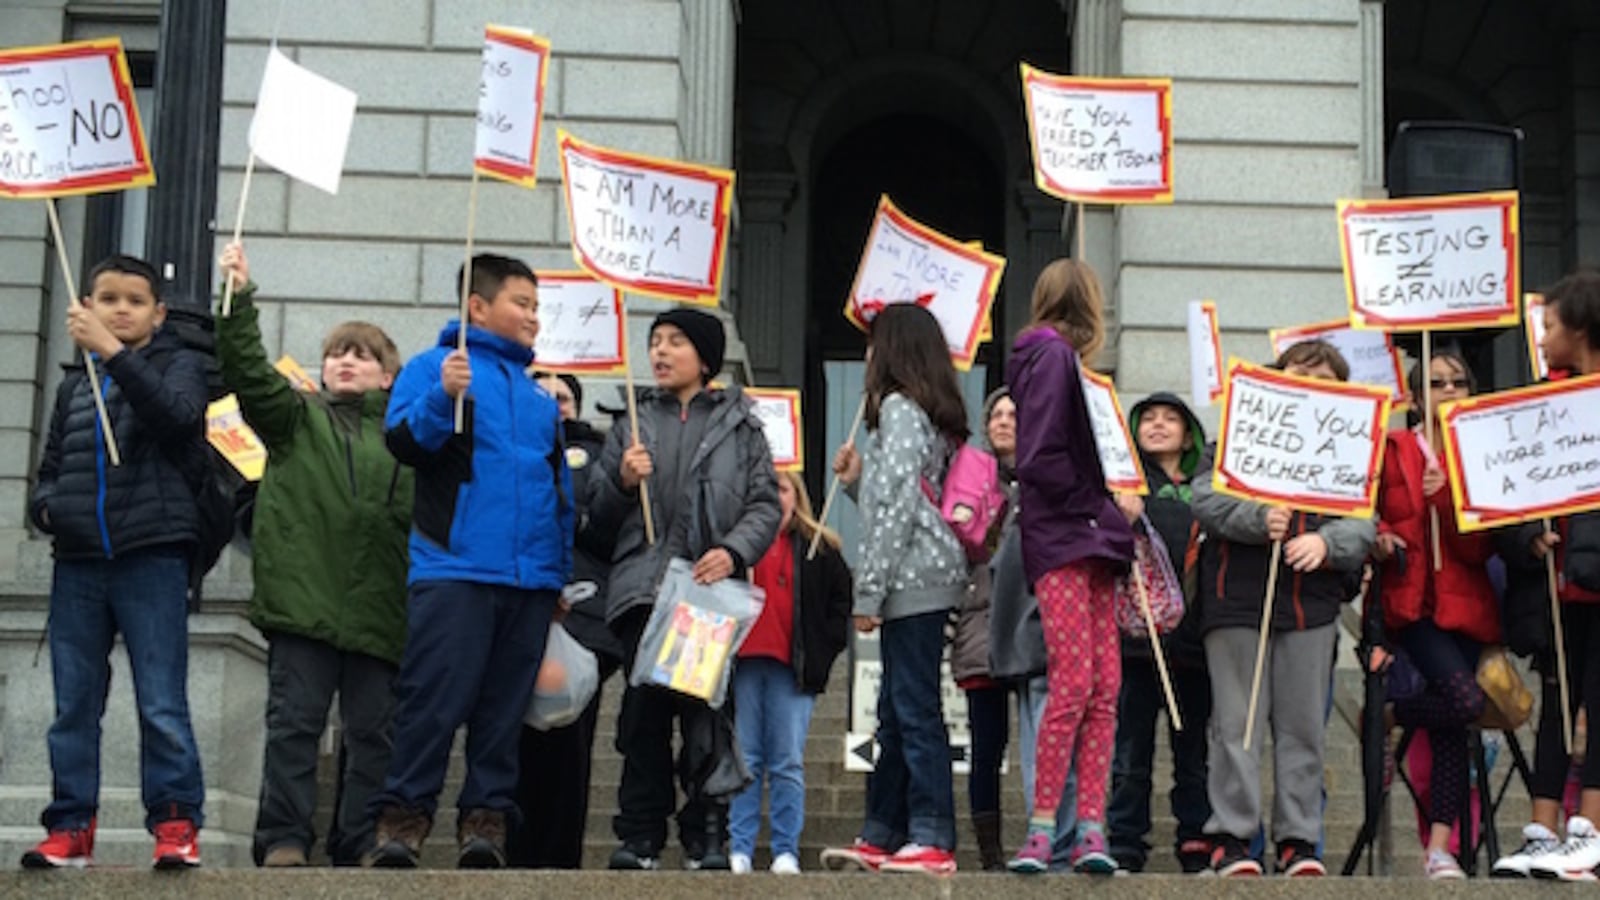 Fifth graders from Denver's Lincoln Elementary School were in the crowd at the anti-testing rally.